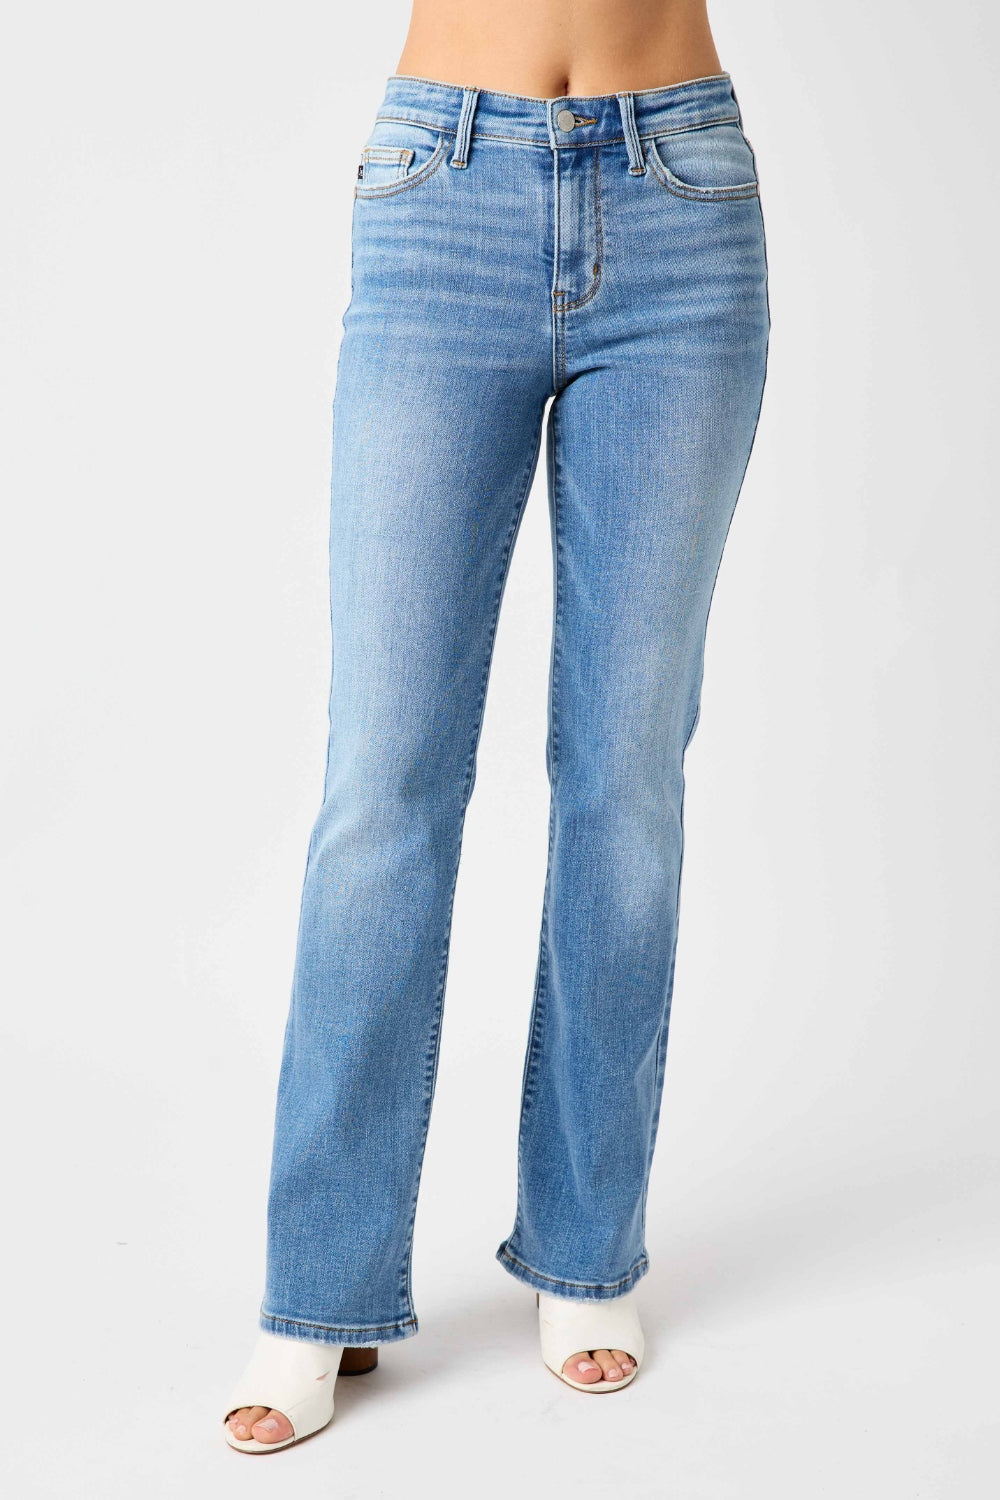 Judy Blue Full Size High Waist Straight Jeans - Sybaritic Bags & Clothing